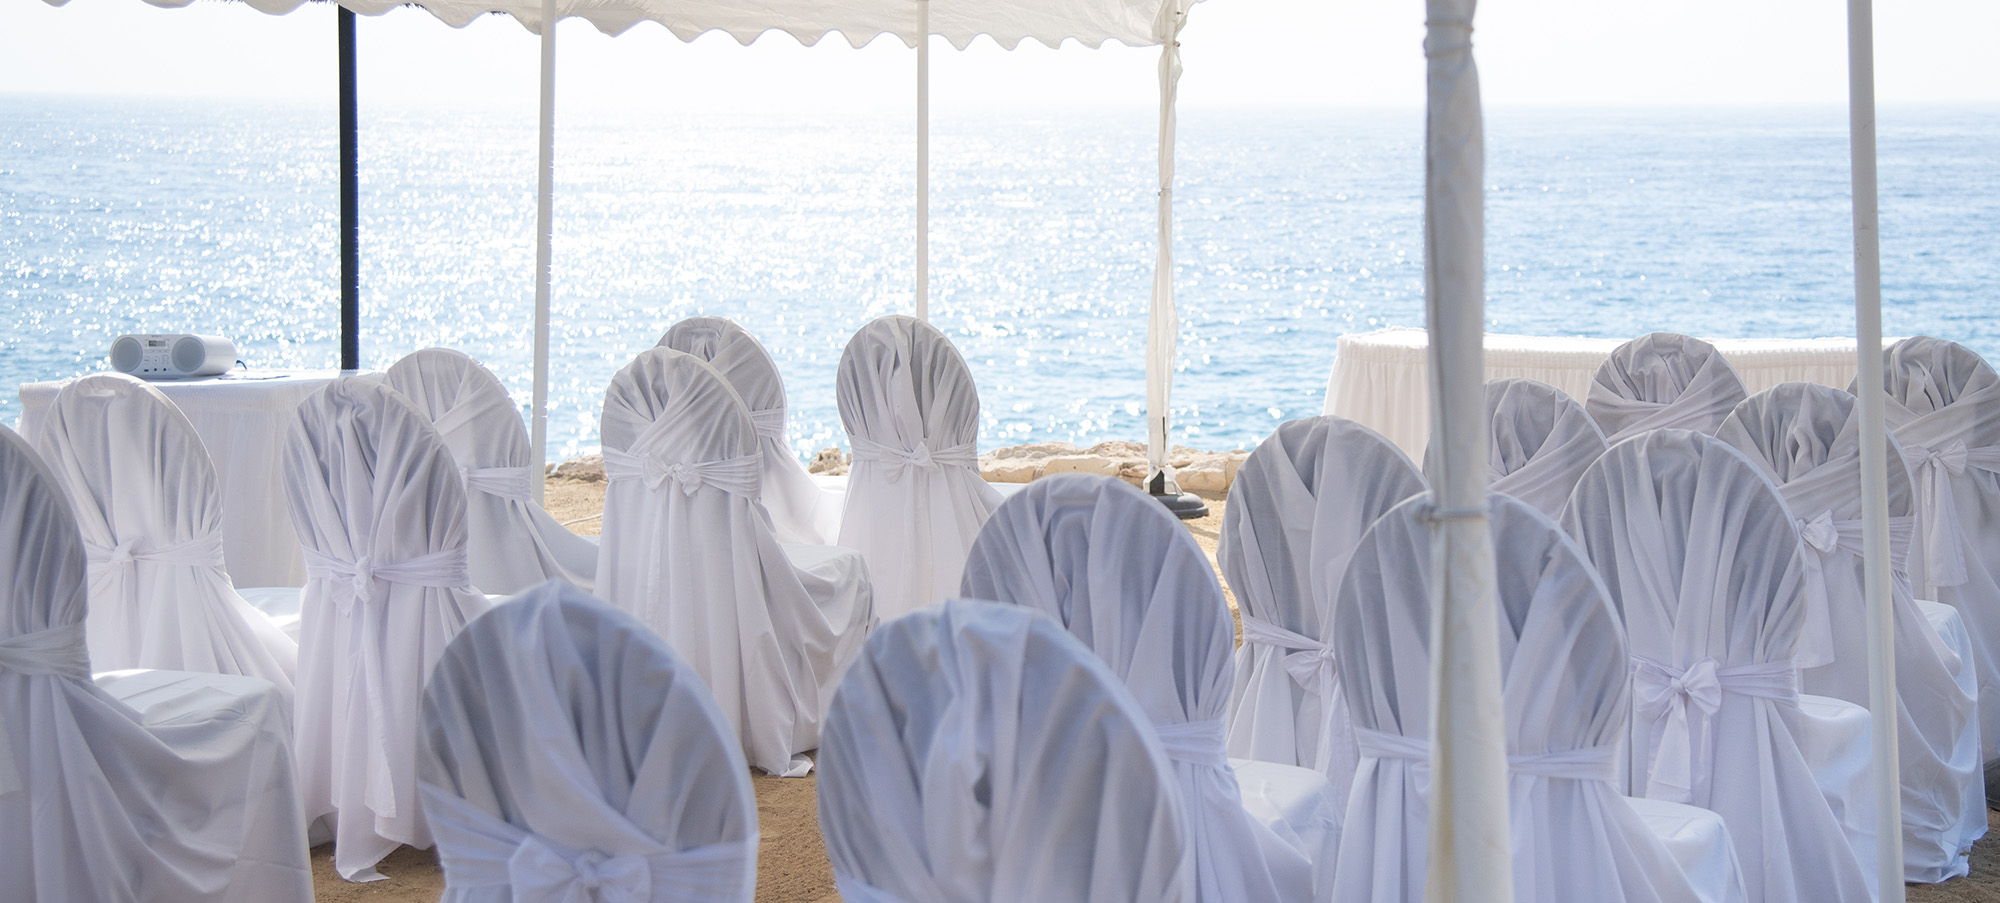 Book your wedding day in Azia Resort & Spa Paphos